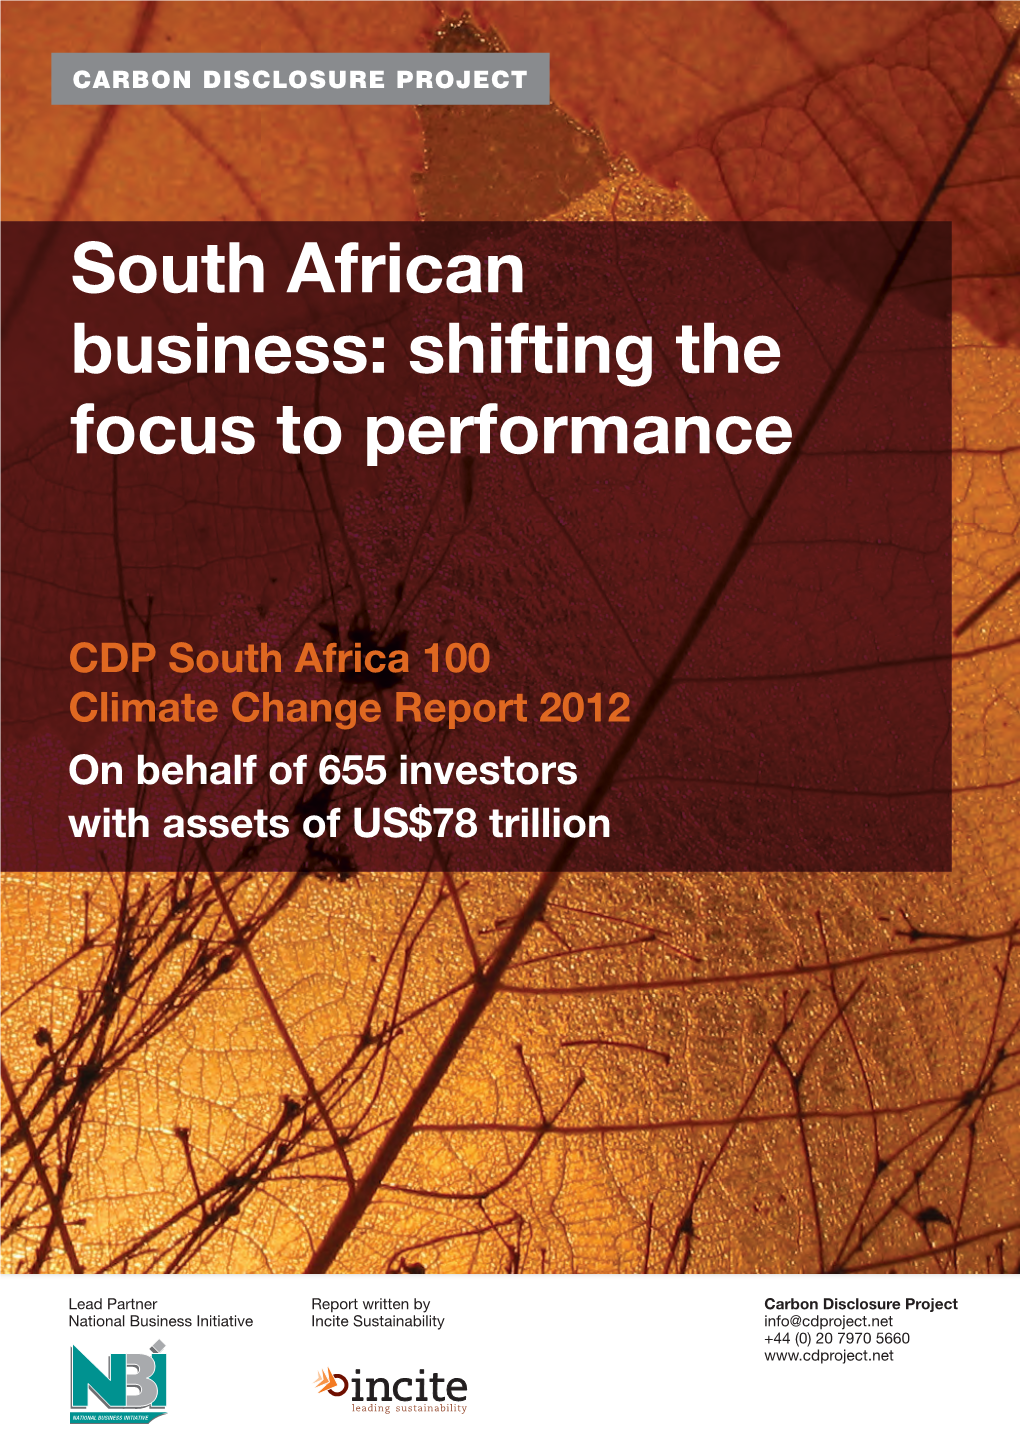 CDP South Africa 100 Climate Change Report 2012 on Behalf of 655 Investors with Assets of US$78 Trillion